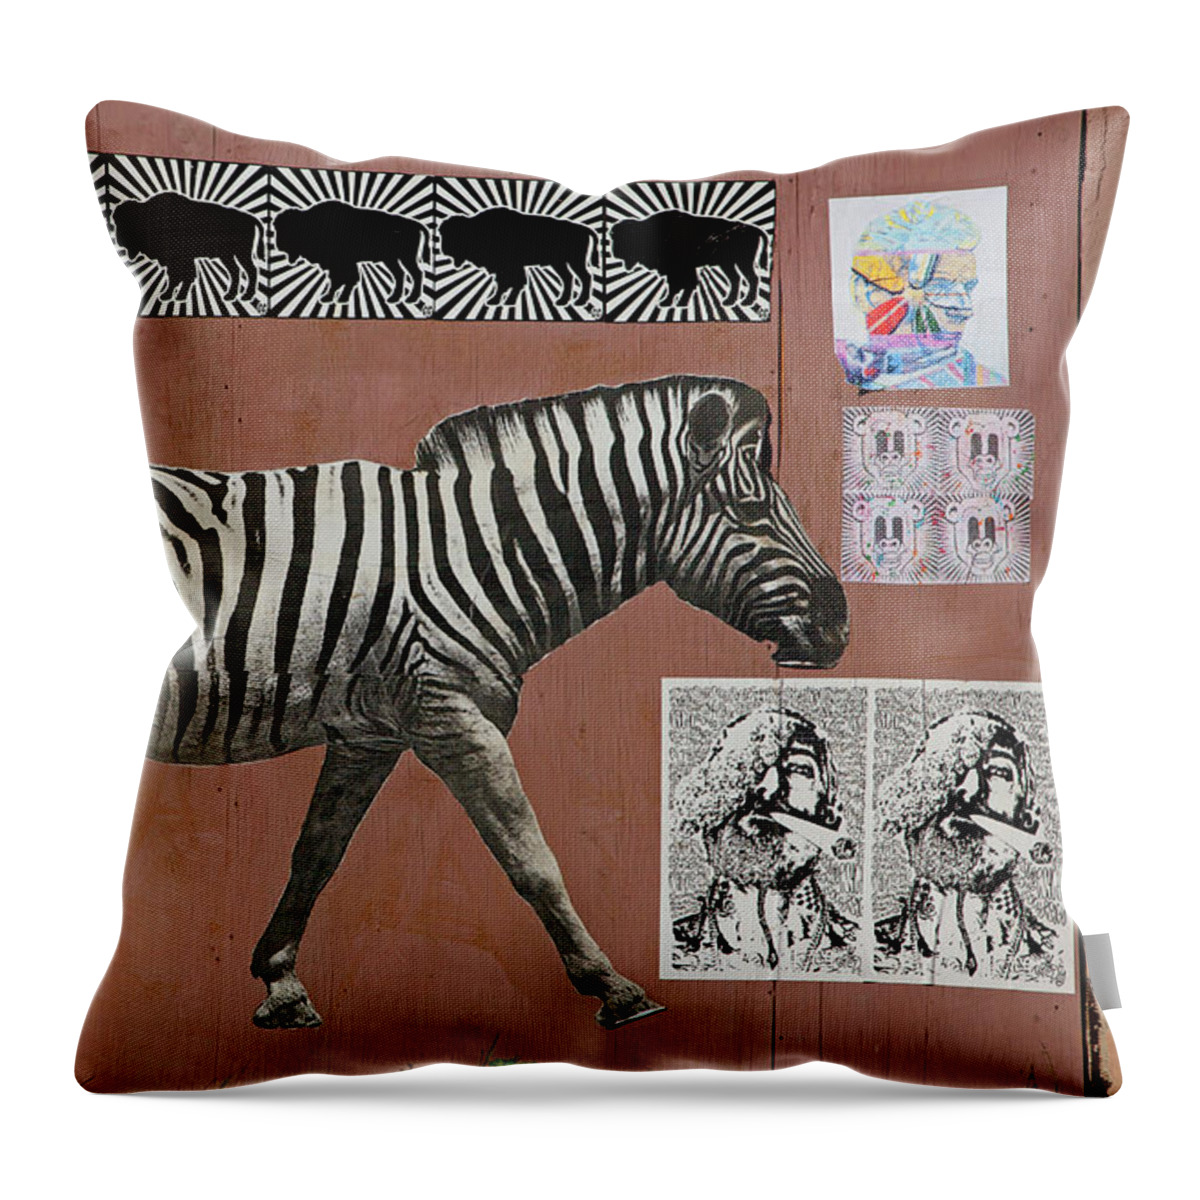 Street Art Throw Pillow featuring the photograph Zebra Collage by Art Block Collections